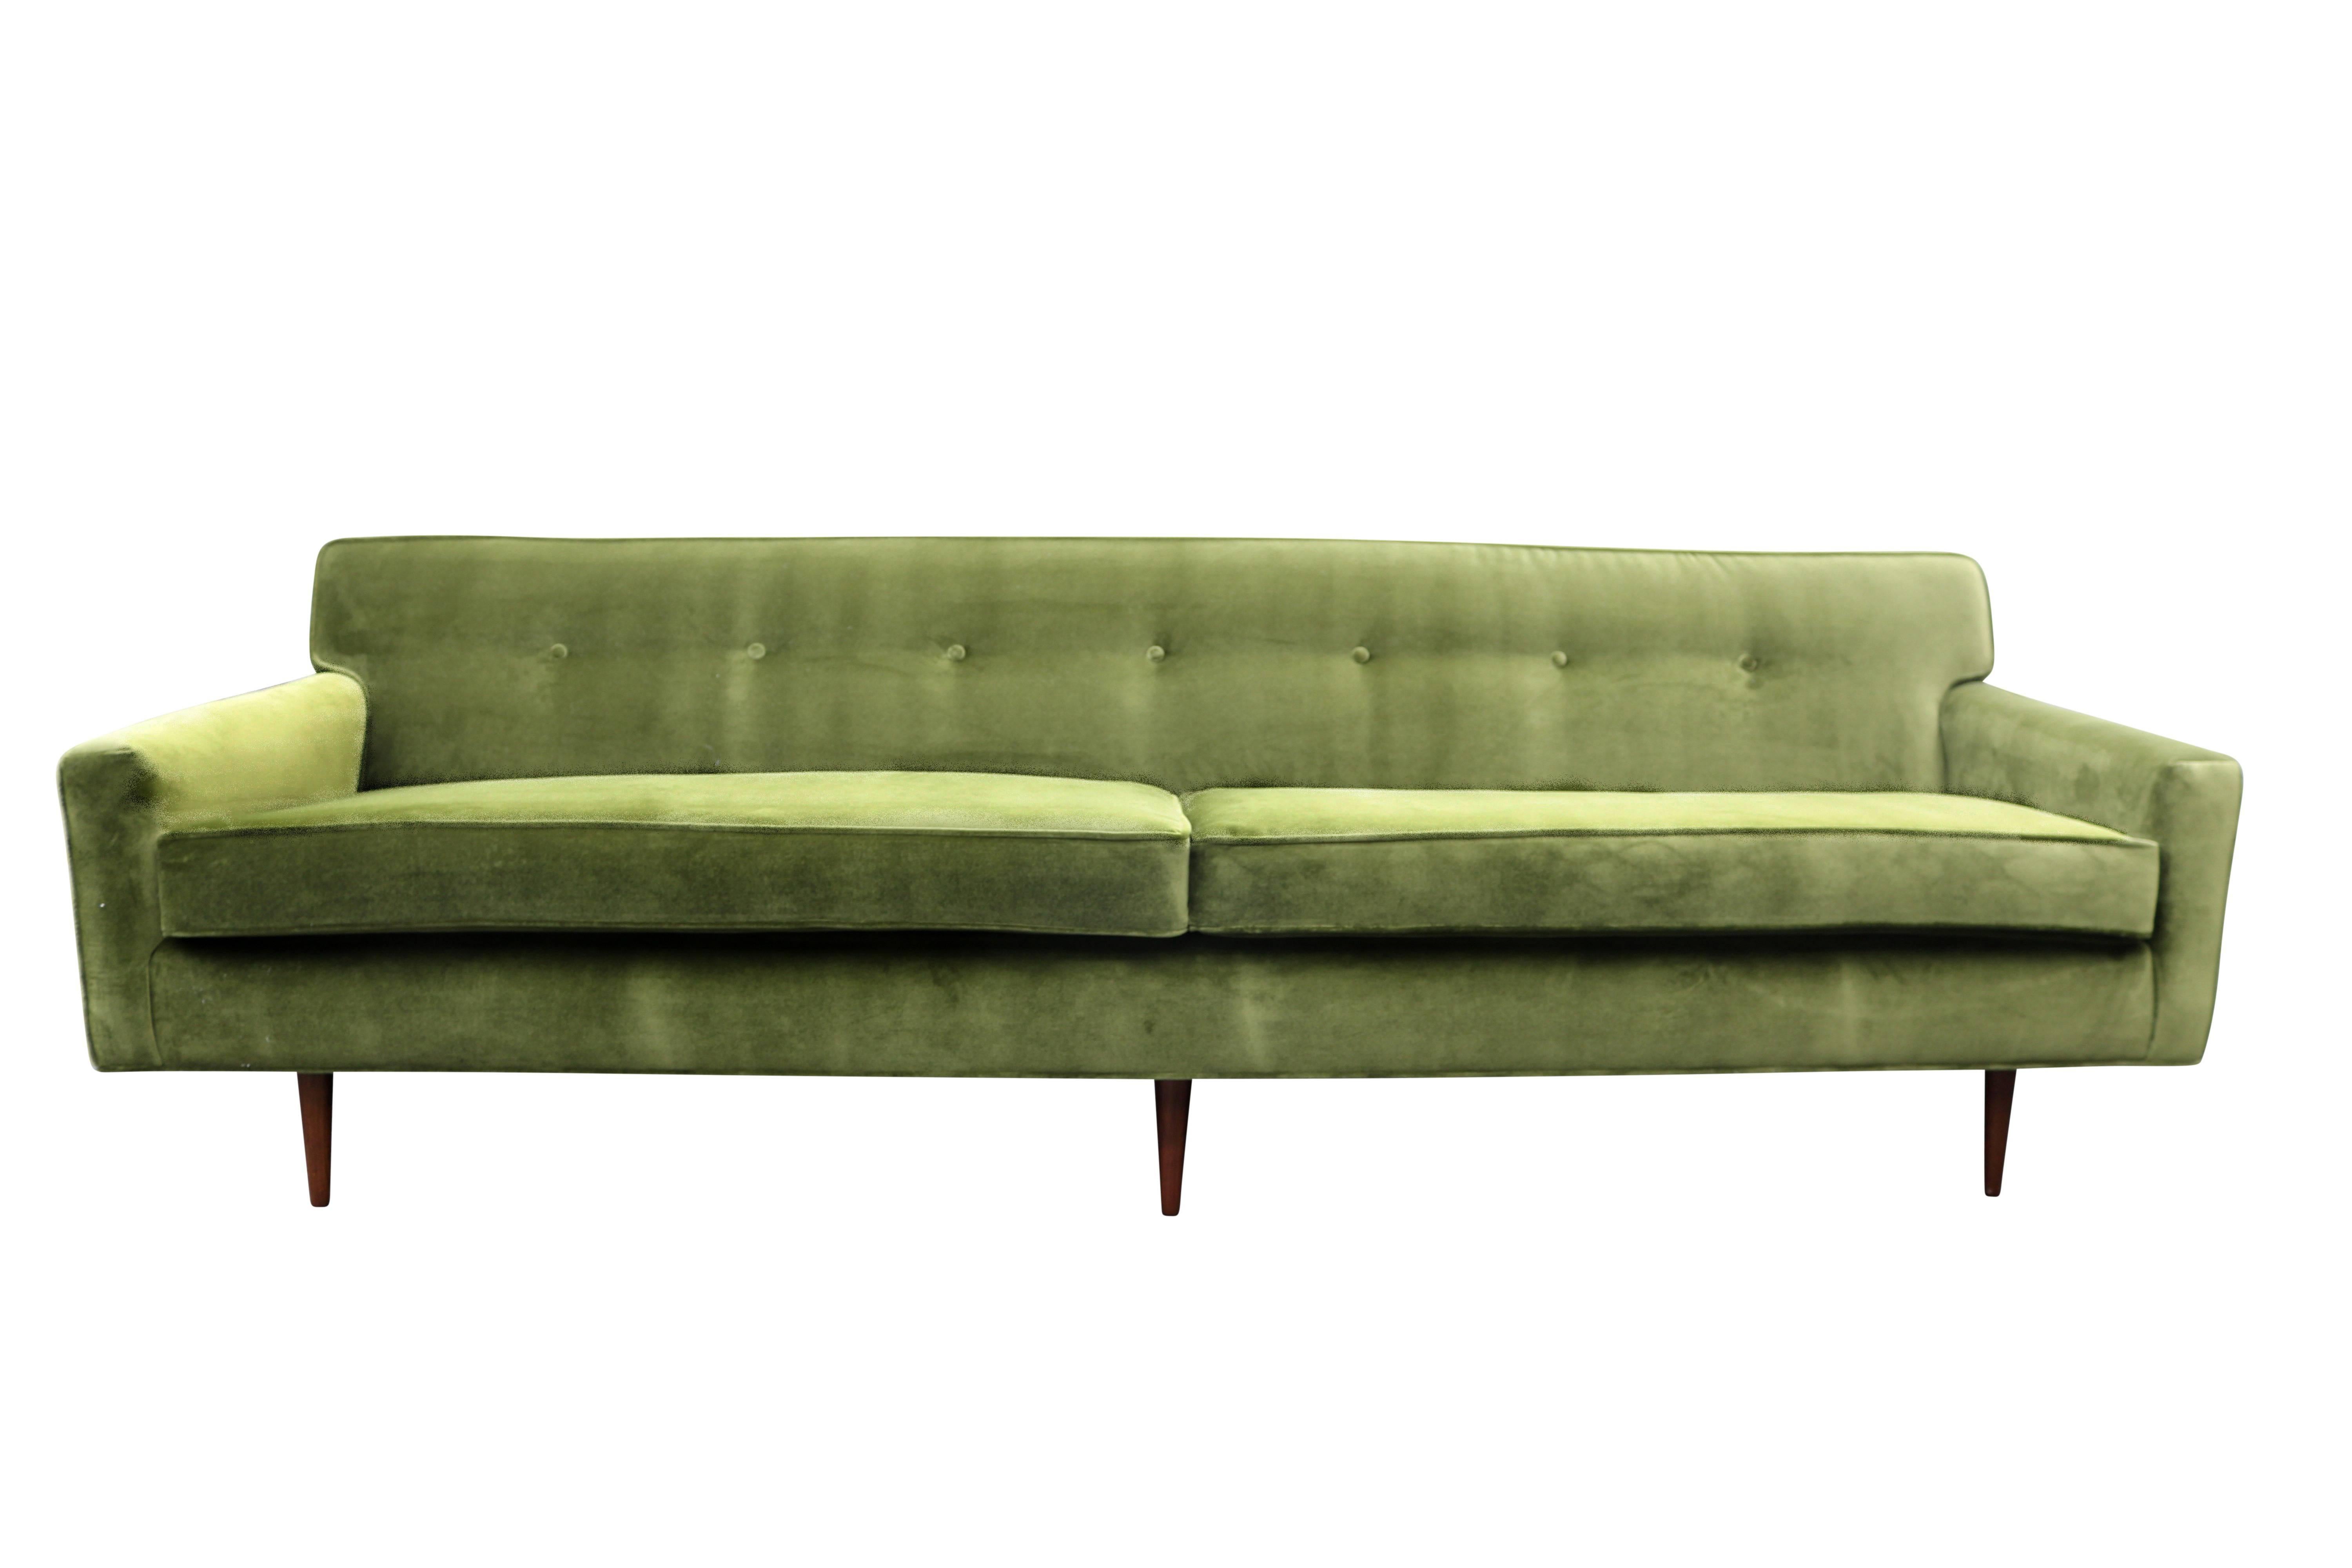 This long and low vintage Mid-Century Modern sofa has been completely restored and covered in a luscious green velvet. Seven button detail and walnut legs give it a distinctive look.